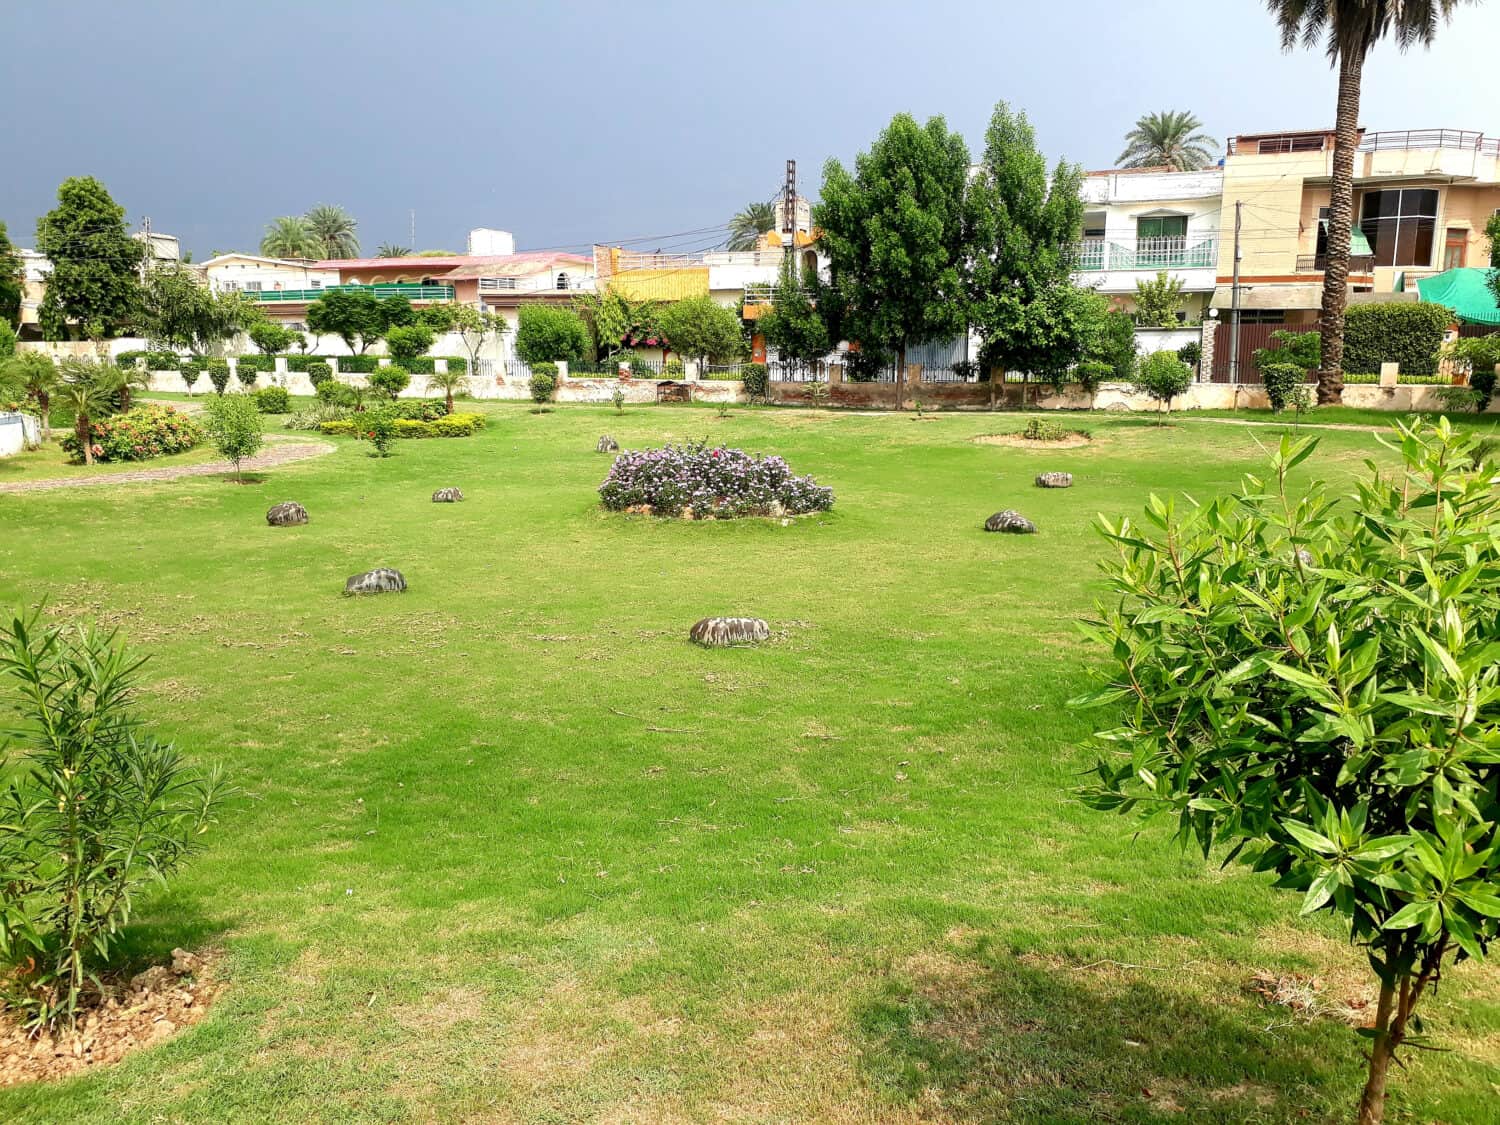 Beautifull Landscaped park in sargodha with beautifull flowers grass plants trees sky and gravells also walking tracks